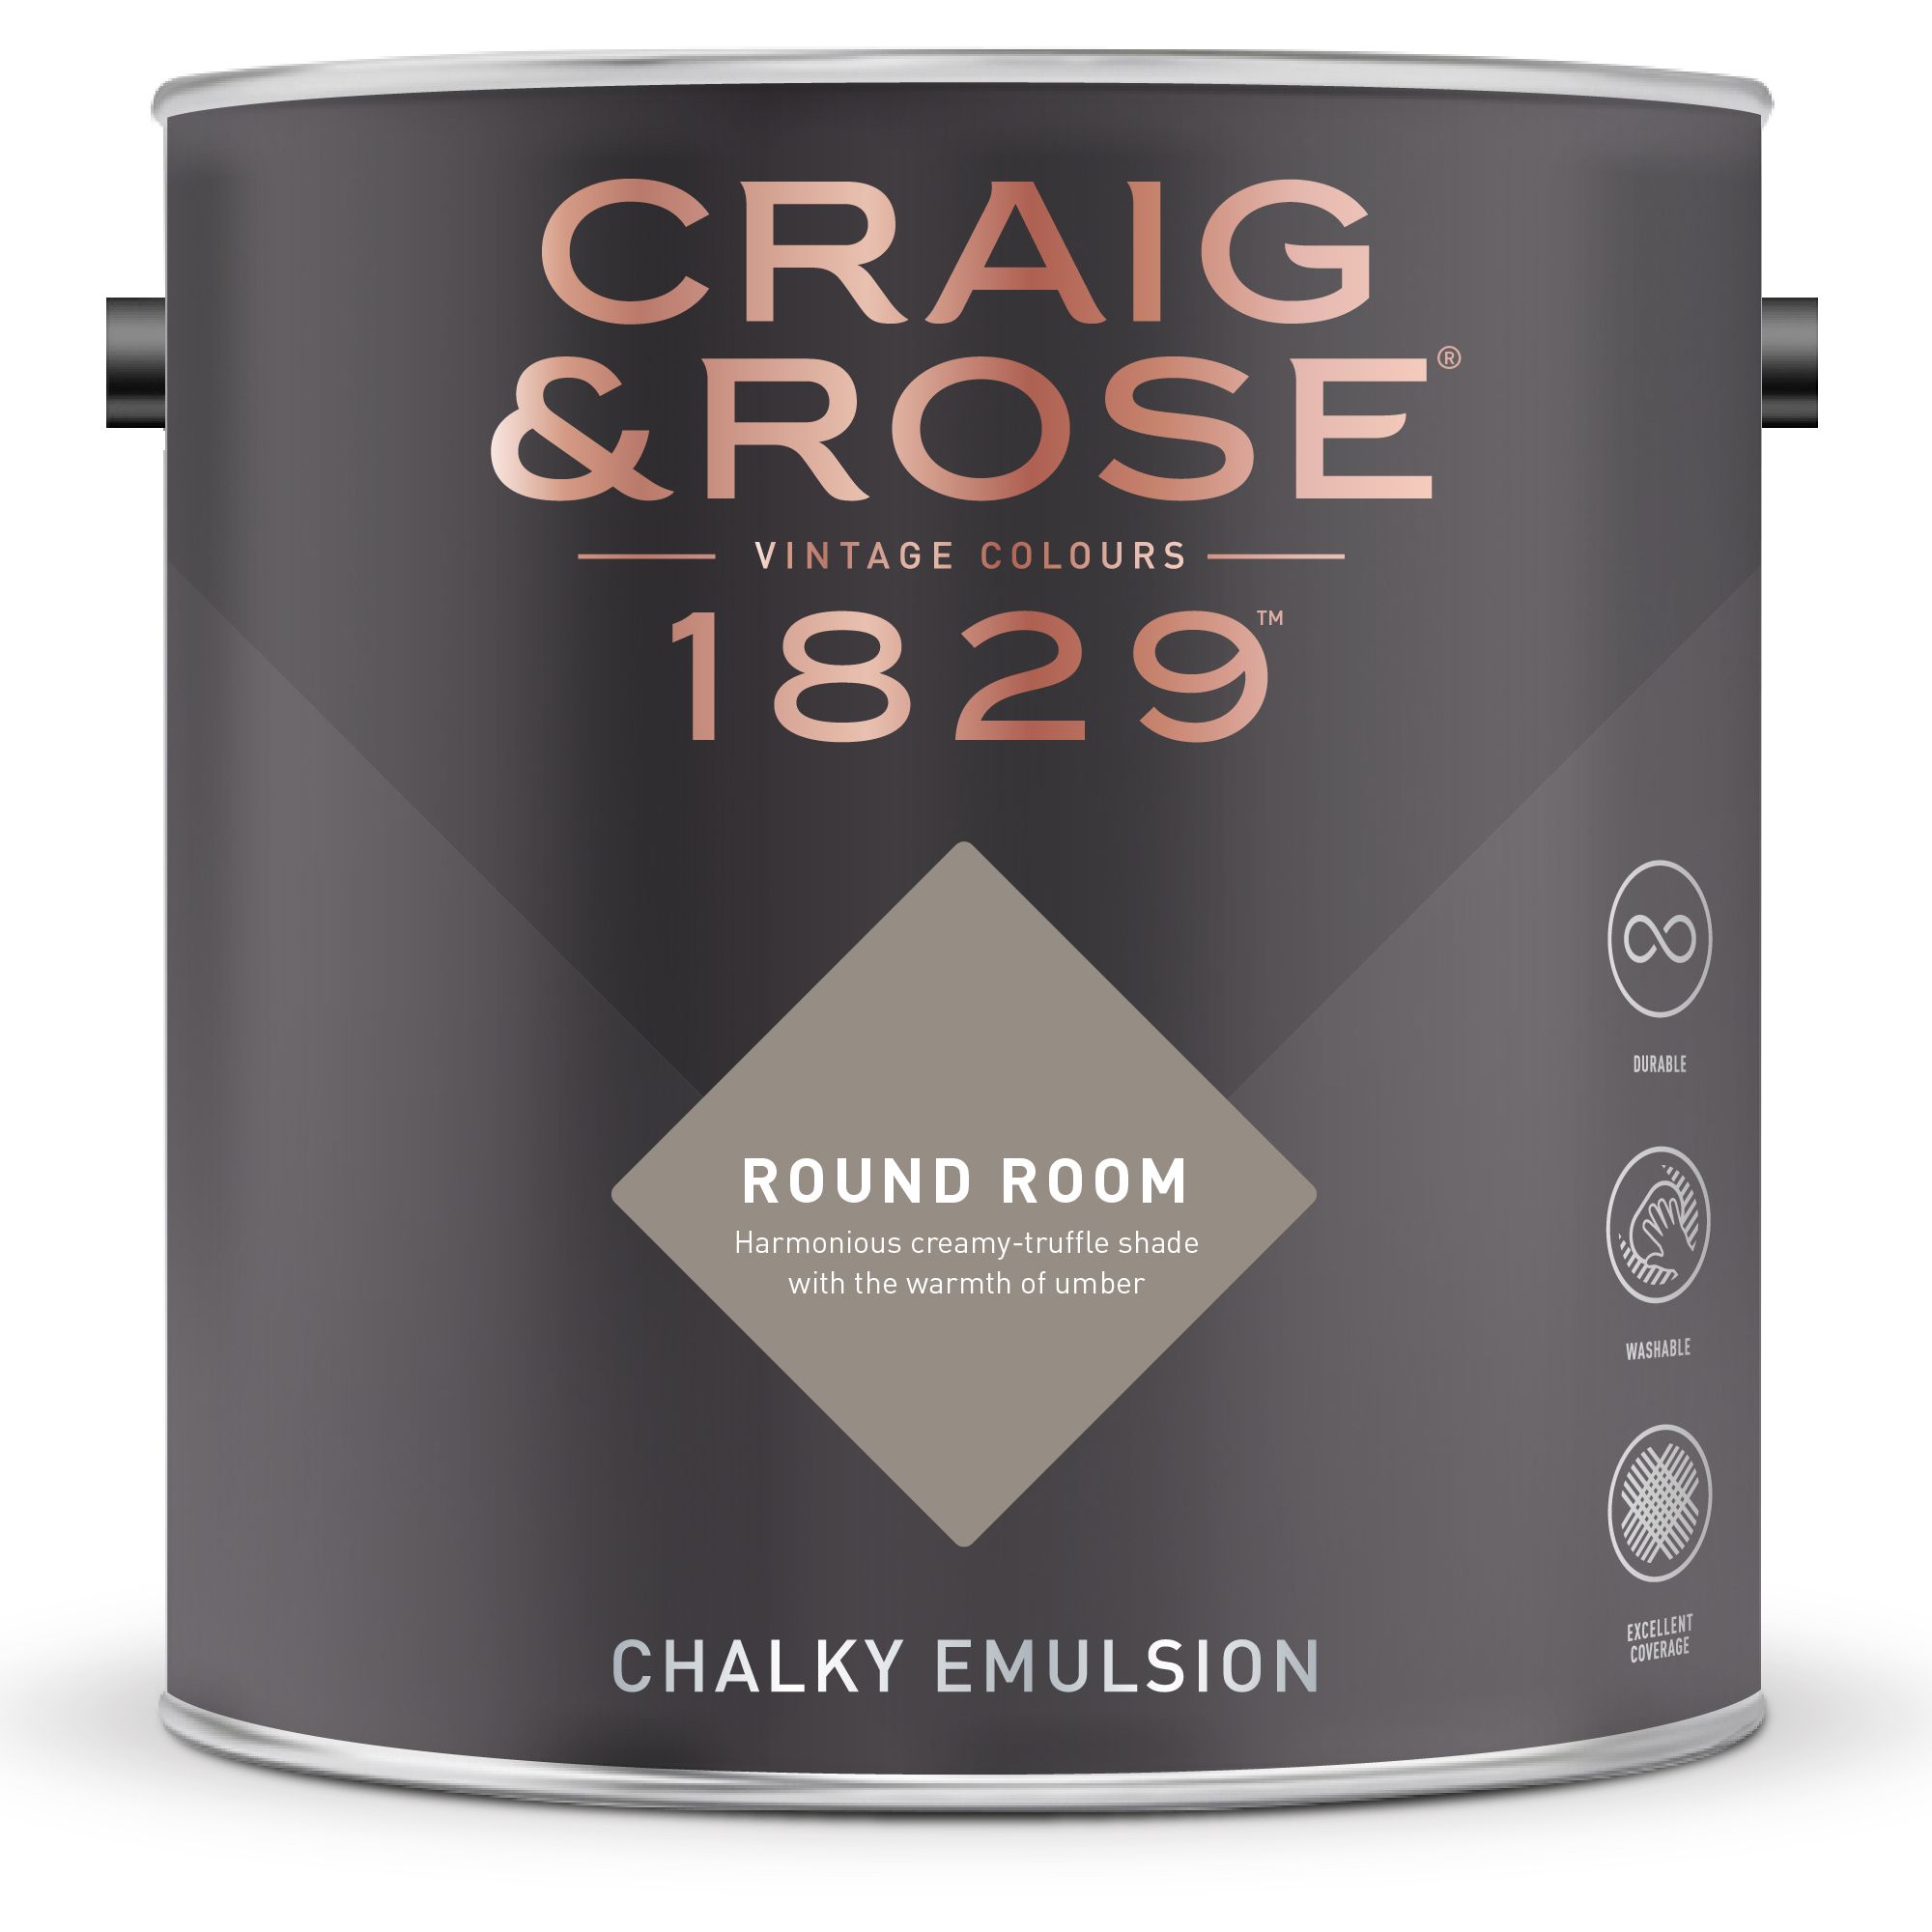 Craig & Rose 1829 Round Room Chalky Emulsion paint, 2.5L